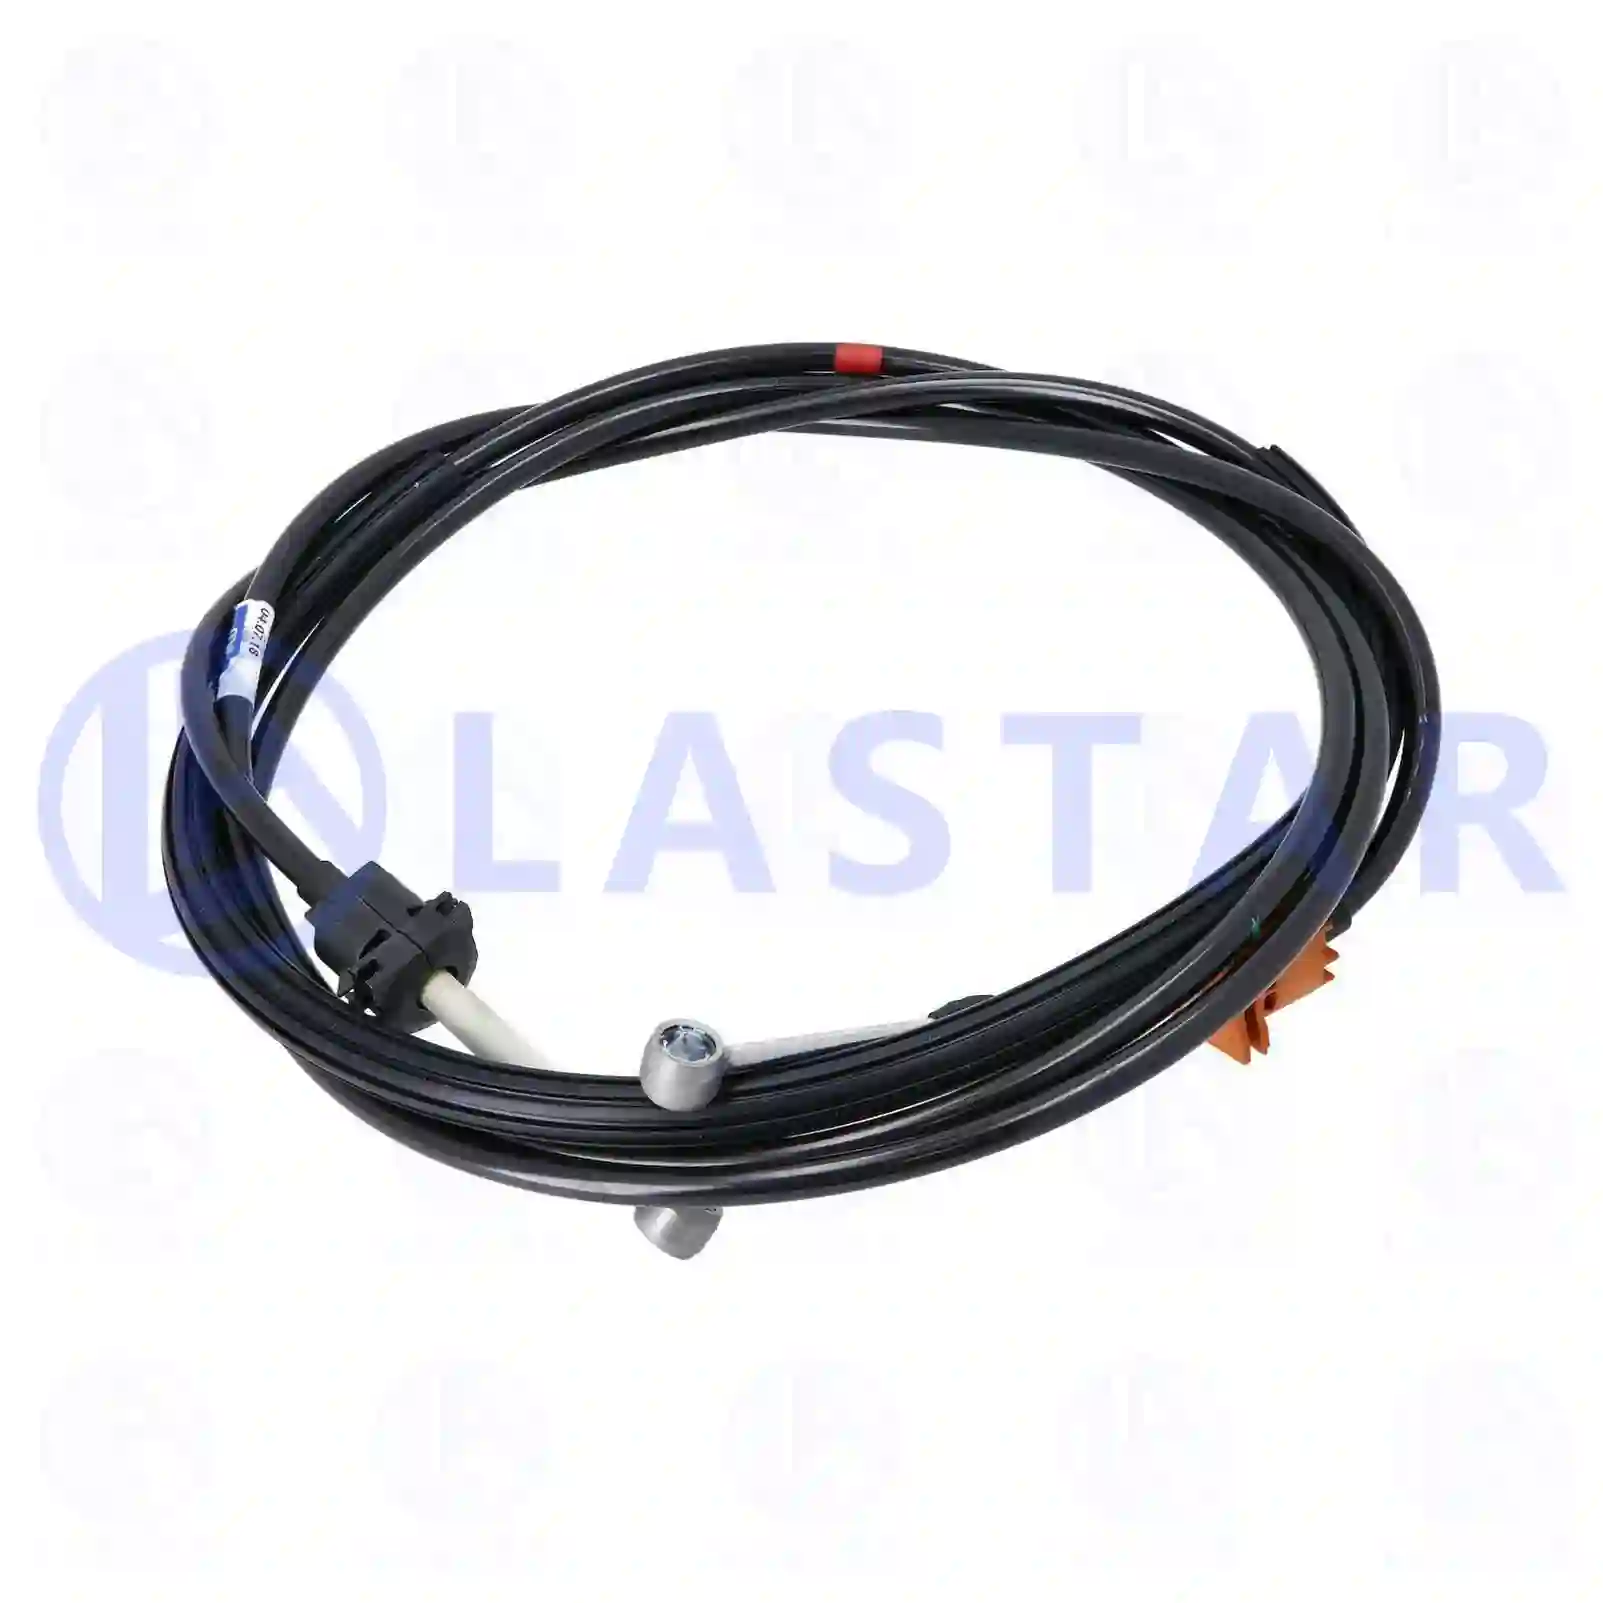 Control cable, switching, 77732239, 20545976, 20700976, 20702976, 21002876, 21343576, 21789704, ZG21341-0008 ||  77732239 Lastar Spare Part | Truck Spare Parts, Auotomotive Spare Parts Control cable, switching, 77732239, 20545976, 20700976, 20702976, 21002876, 21343576, 21789704, ZG21341-0008 ||  77732239 Lastar Spare Part | Truck Spare Parts, Auotomotive Spare Parts